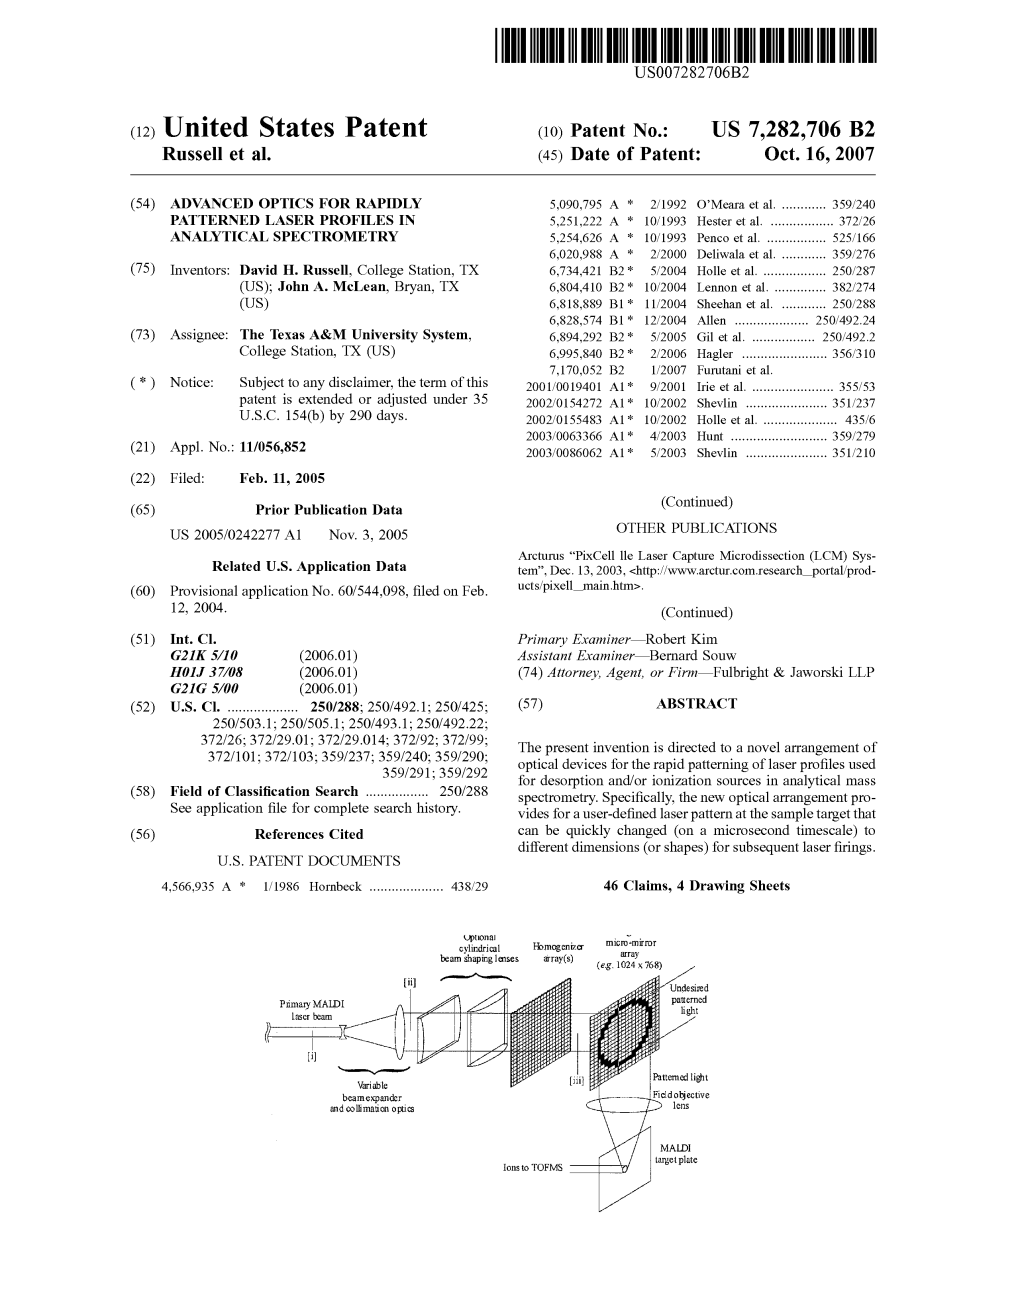 United States Patent (10) Patent N0.: US 7,282,706 B2 Russell Et A]